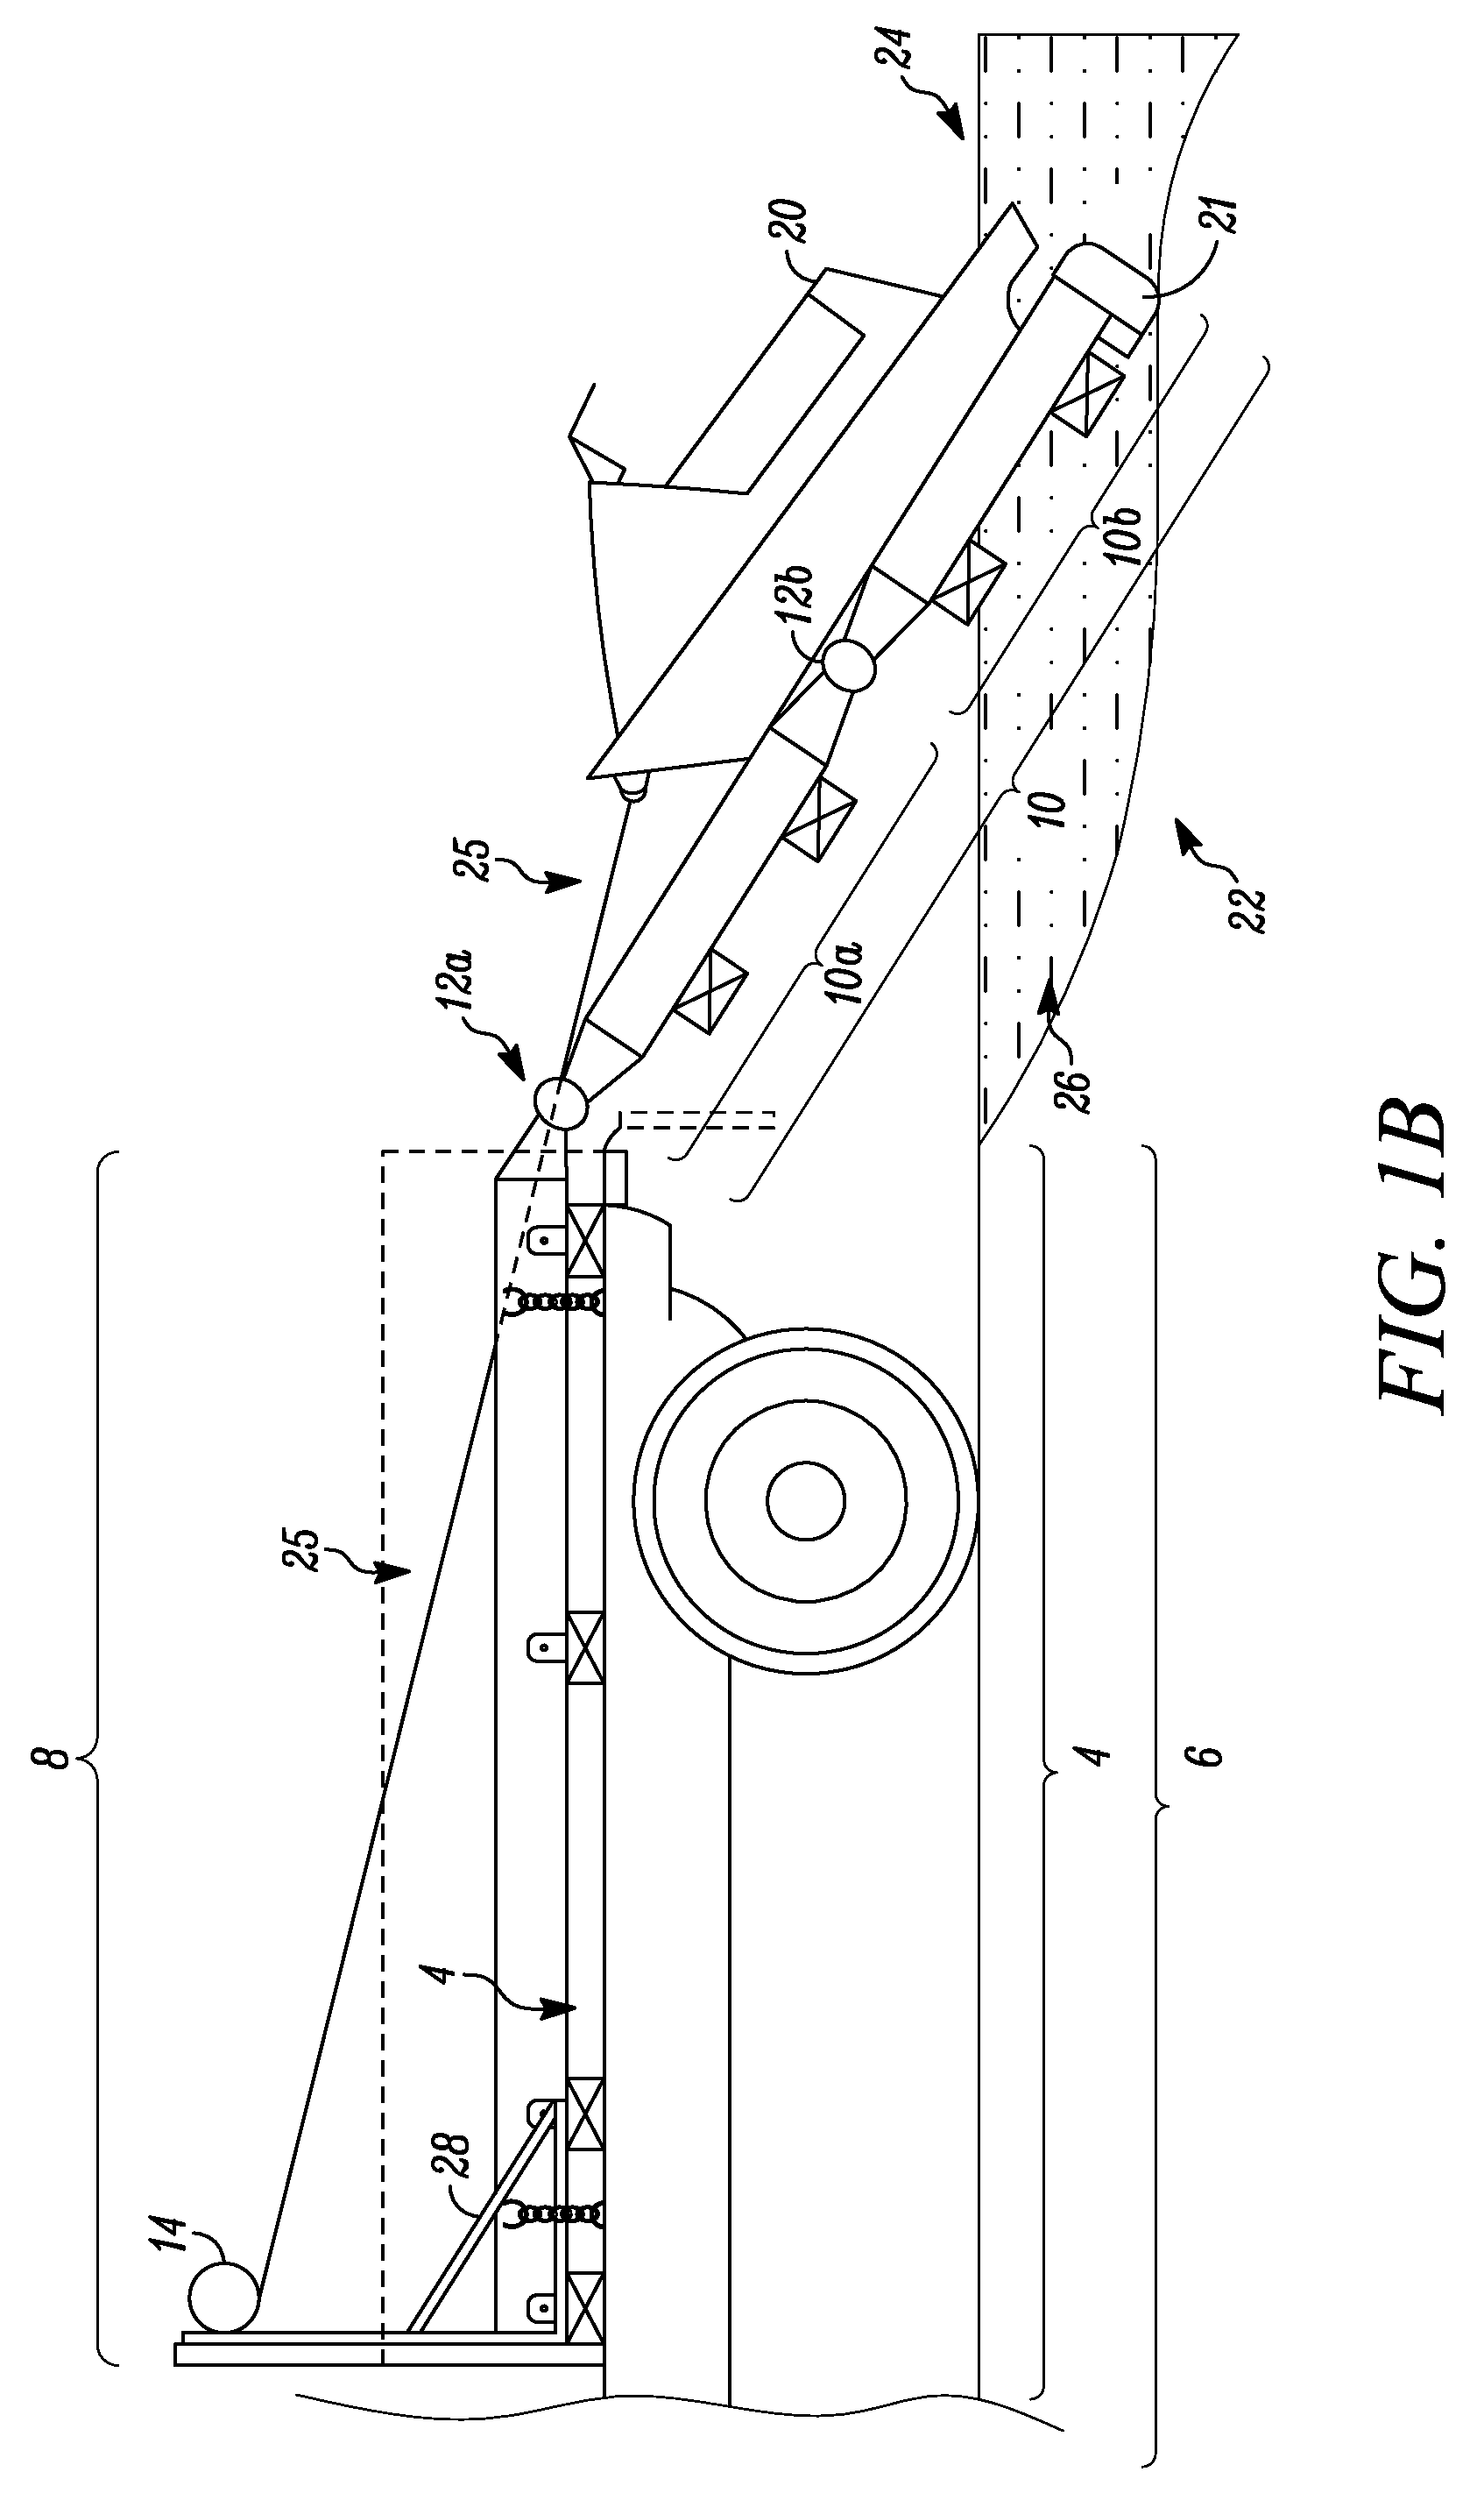 Vehicle mounted launch and retrieval apparatus for a personal watercraft